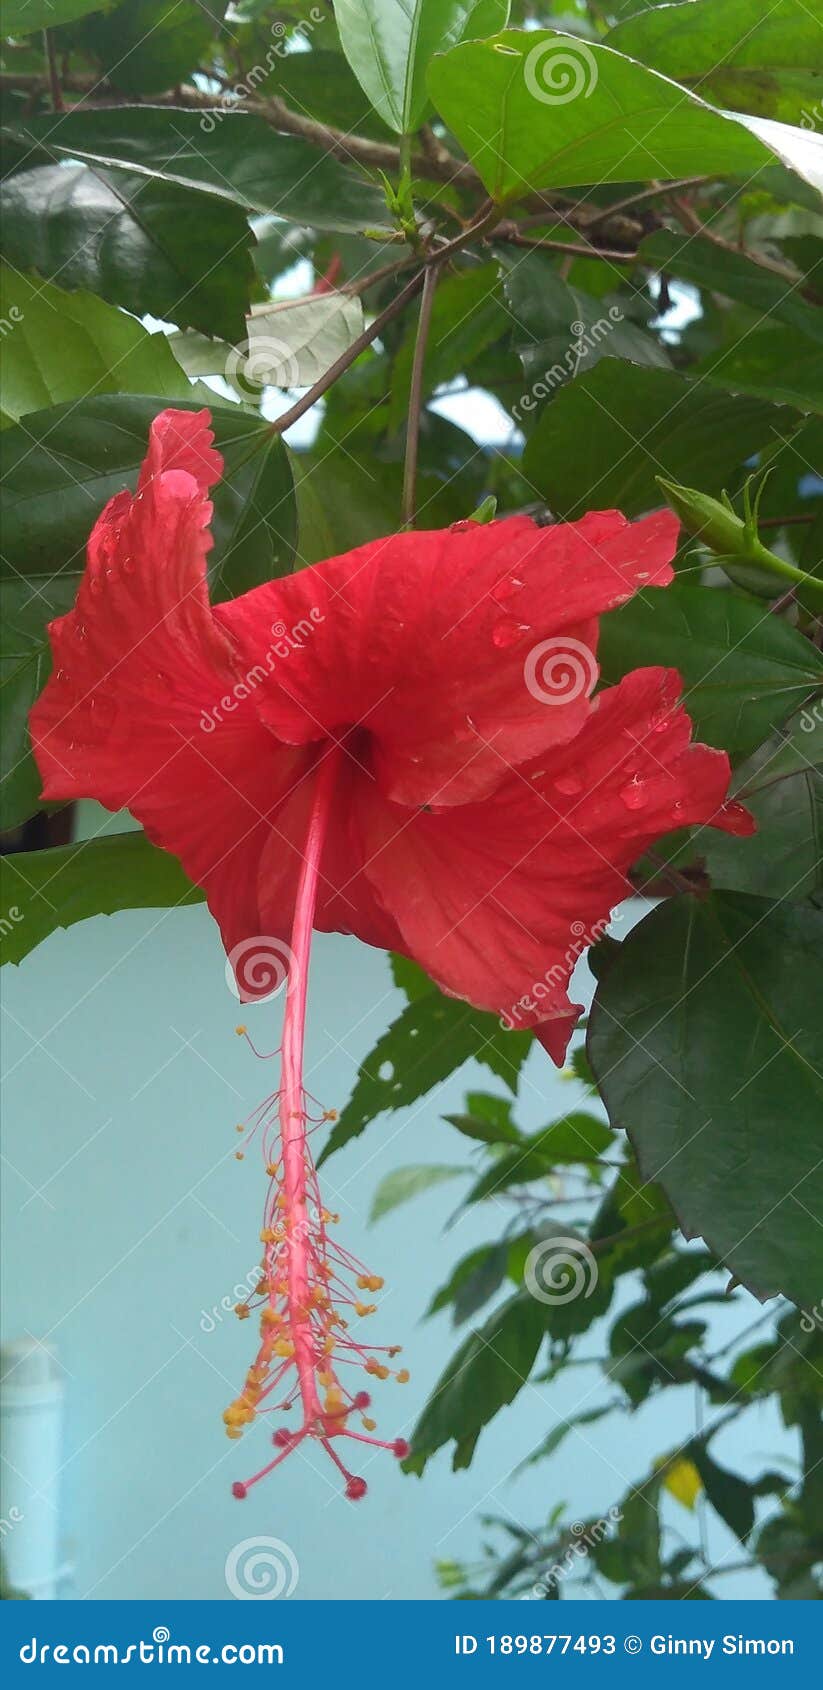 hibiscus rosa sinesis red in color is a common flower